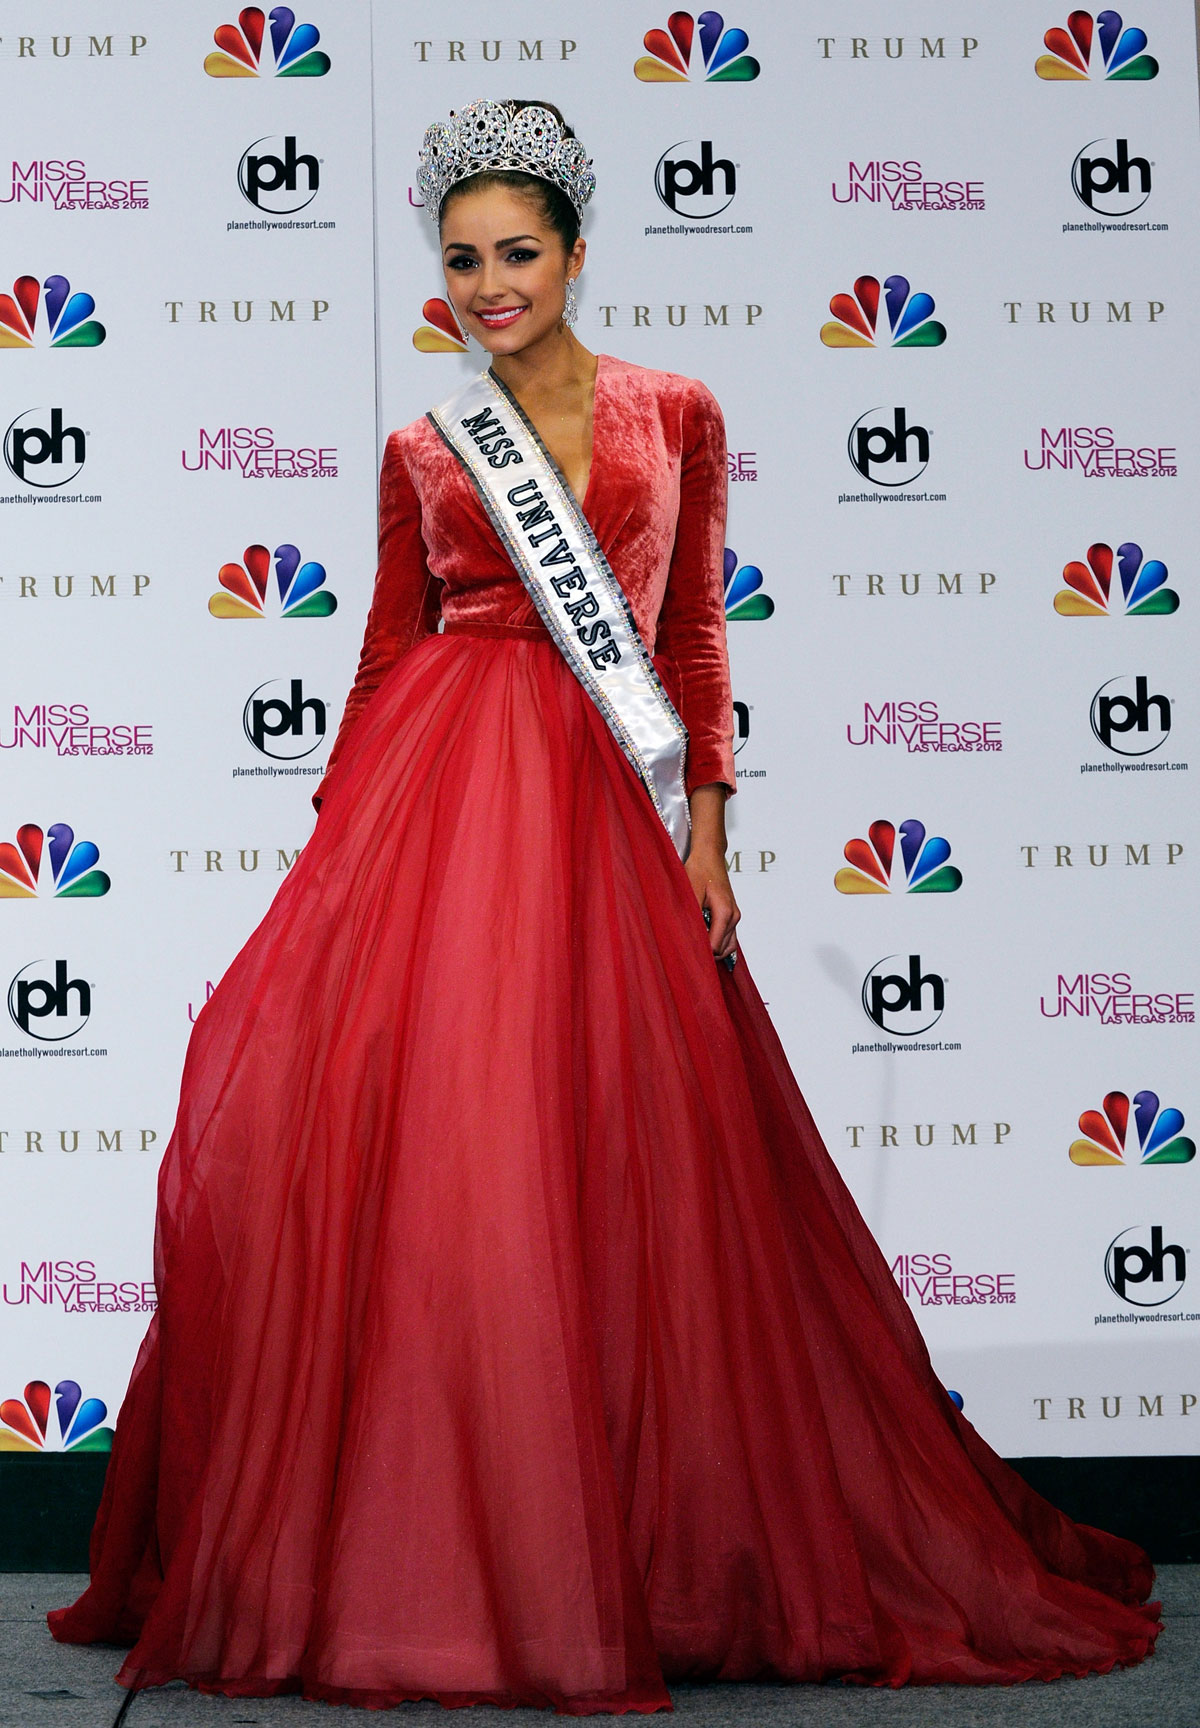 OLIVIA-CULPO-as-Miss-Universe-at-the-2012-Miss-Universe-Pageant-in-Las-Vegas-14.jpg